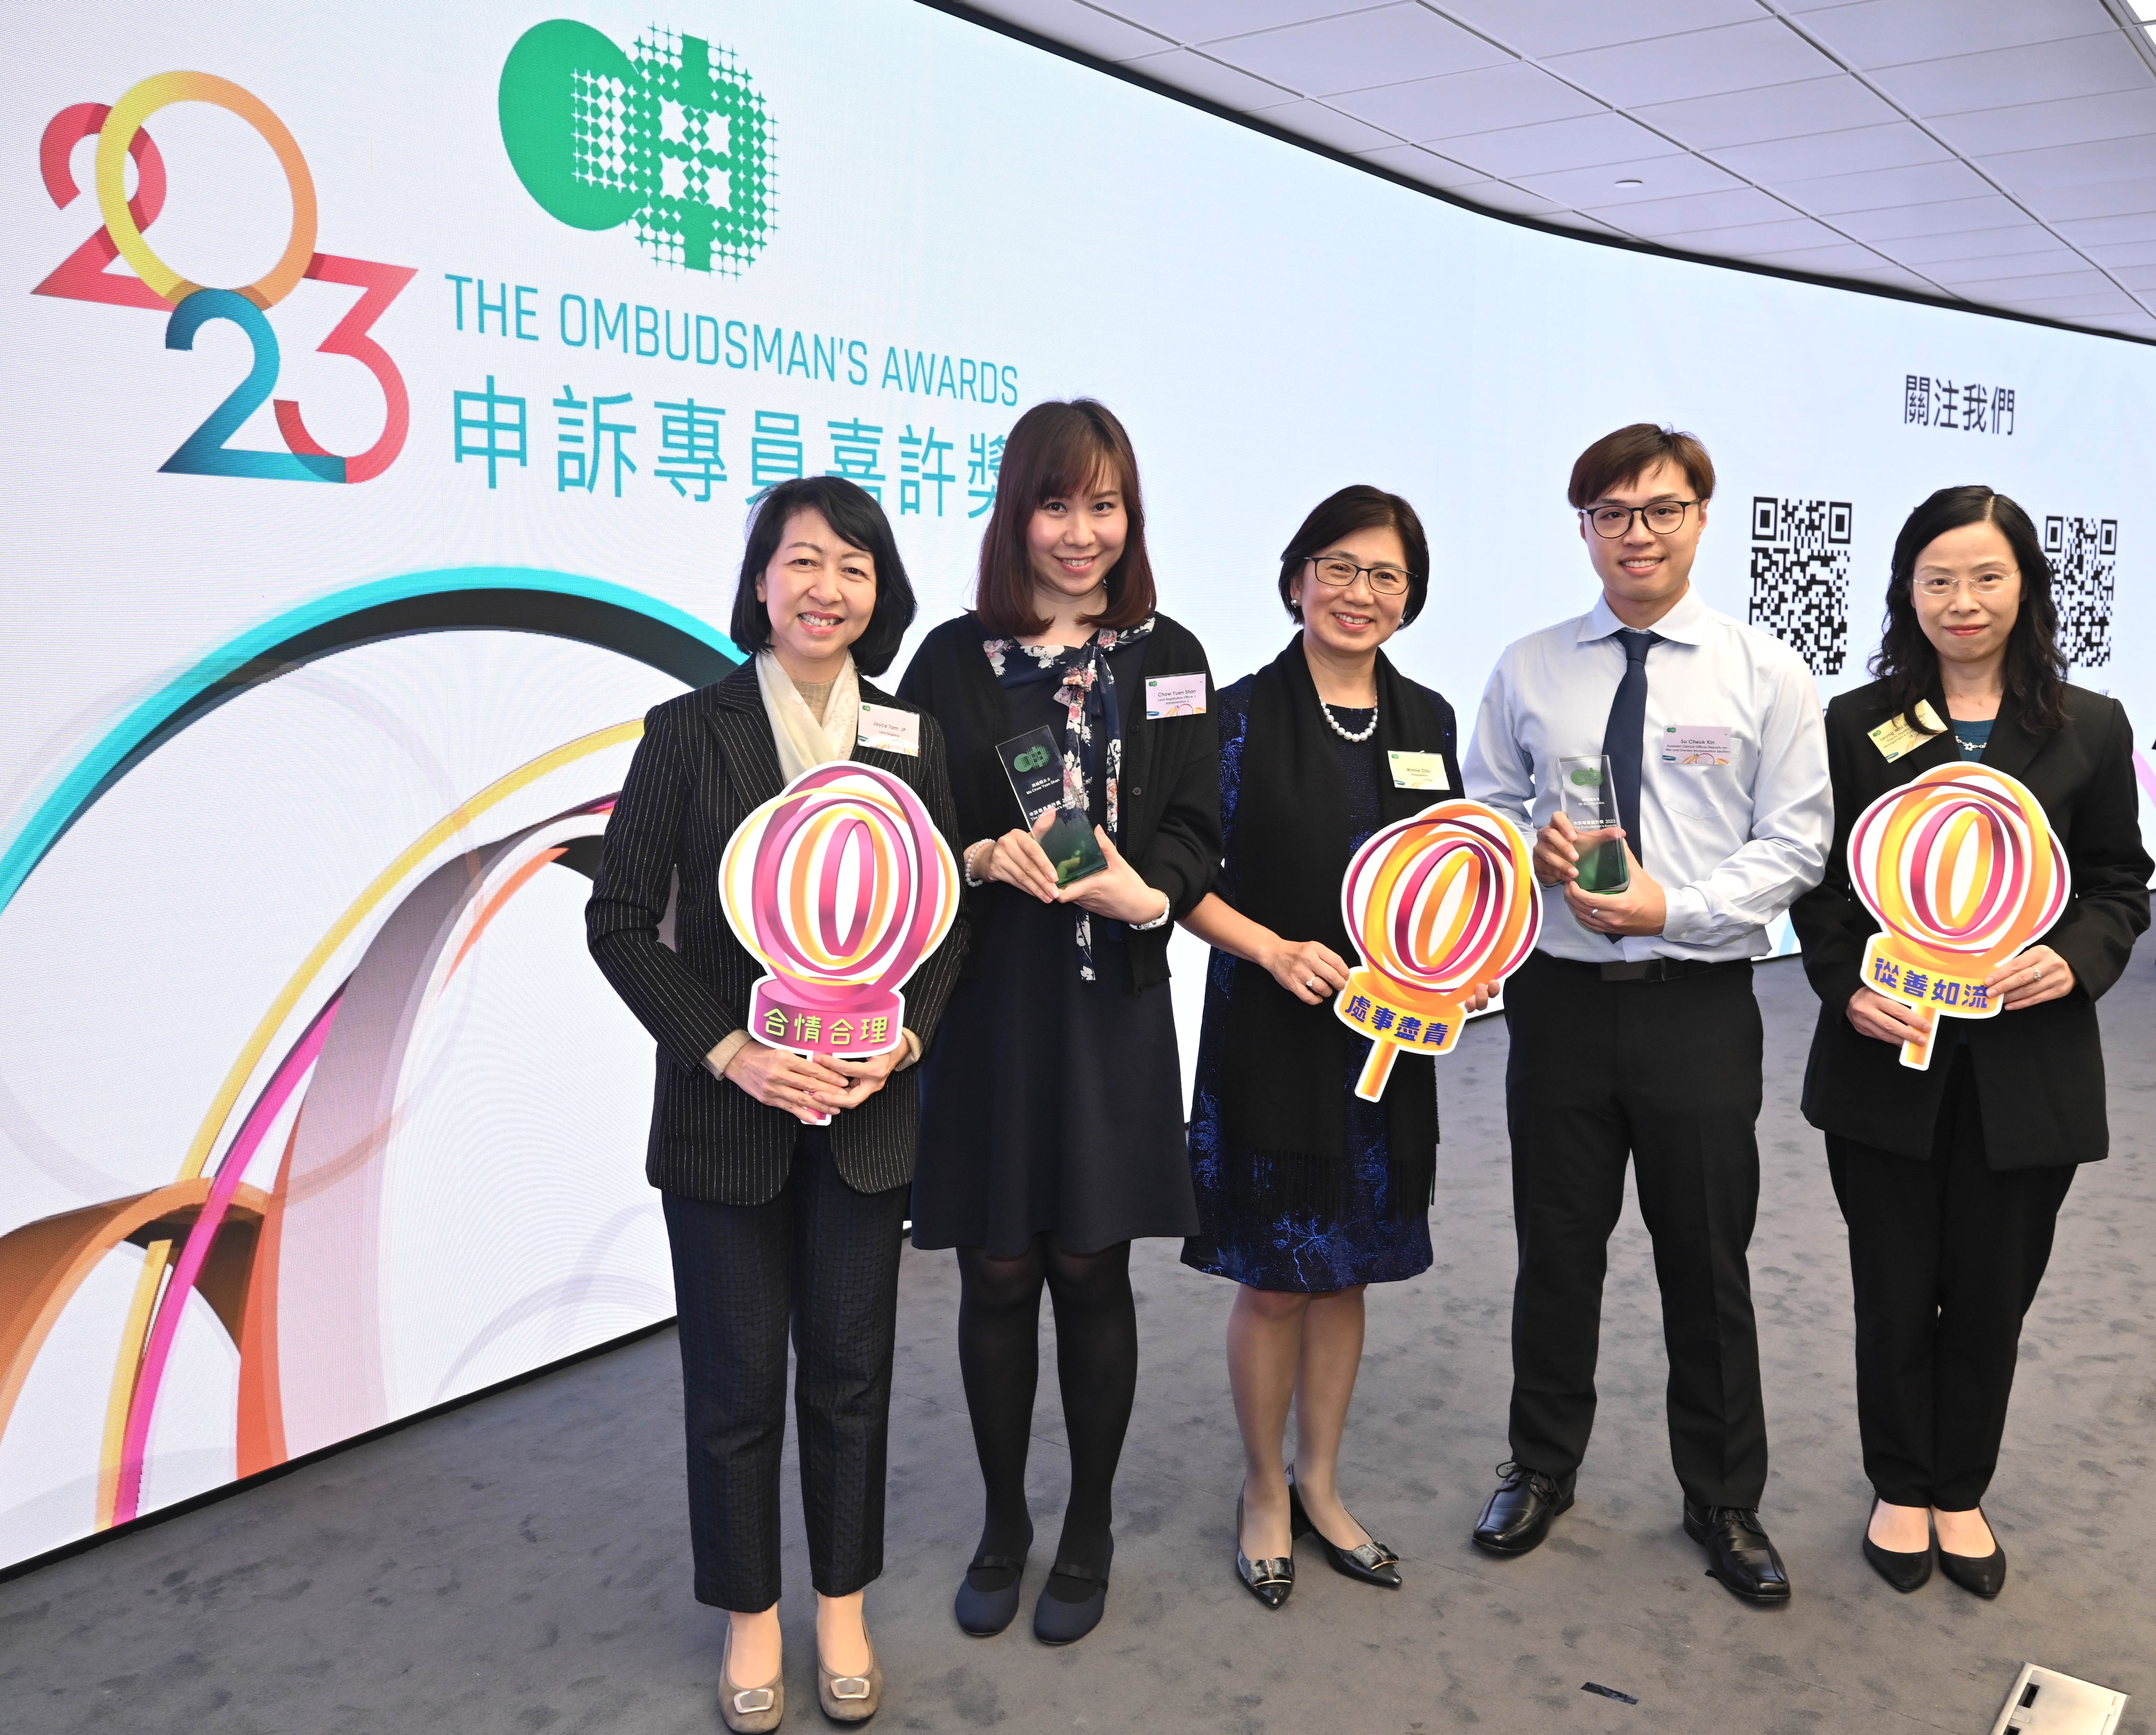 The Ombudsman, Ms Winnie CHIU, (centre) and the Land Registrar, Ms Joyce TAM, JP (first from the left) taking photo with the awardees of The Ombudsman's Awards for Officers of Public Organisations, Land Registration Officer, Miss CHOW Yuen-shan and  Assistant Clerical Officer of the Land Registry, Mr SO Cheuk-kin